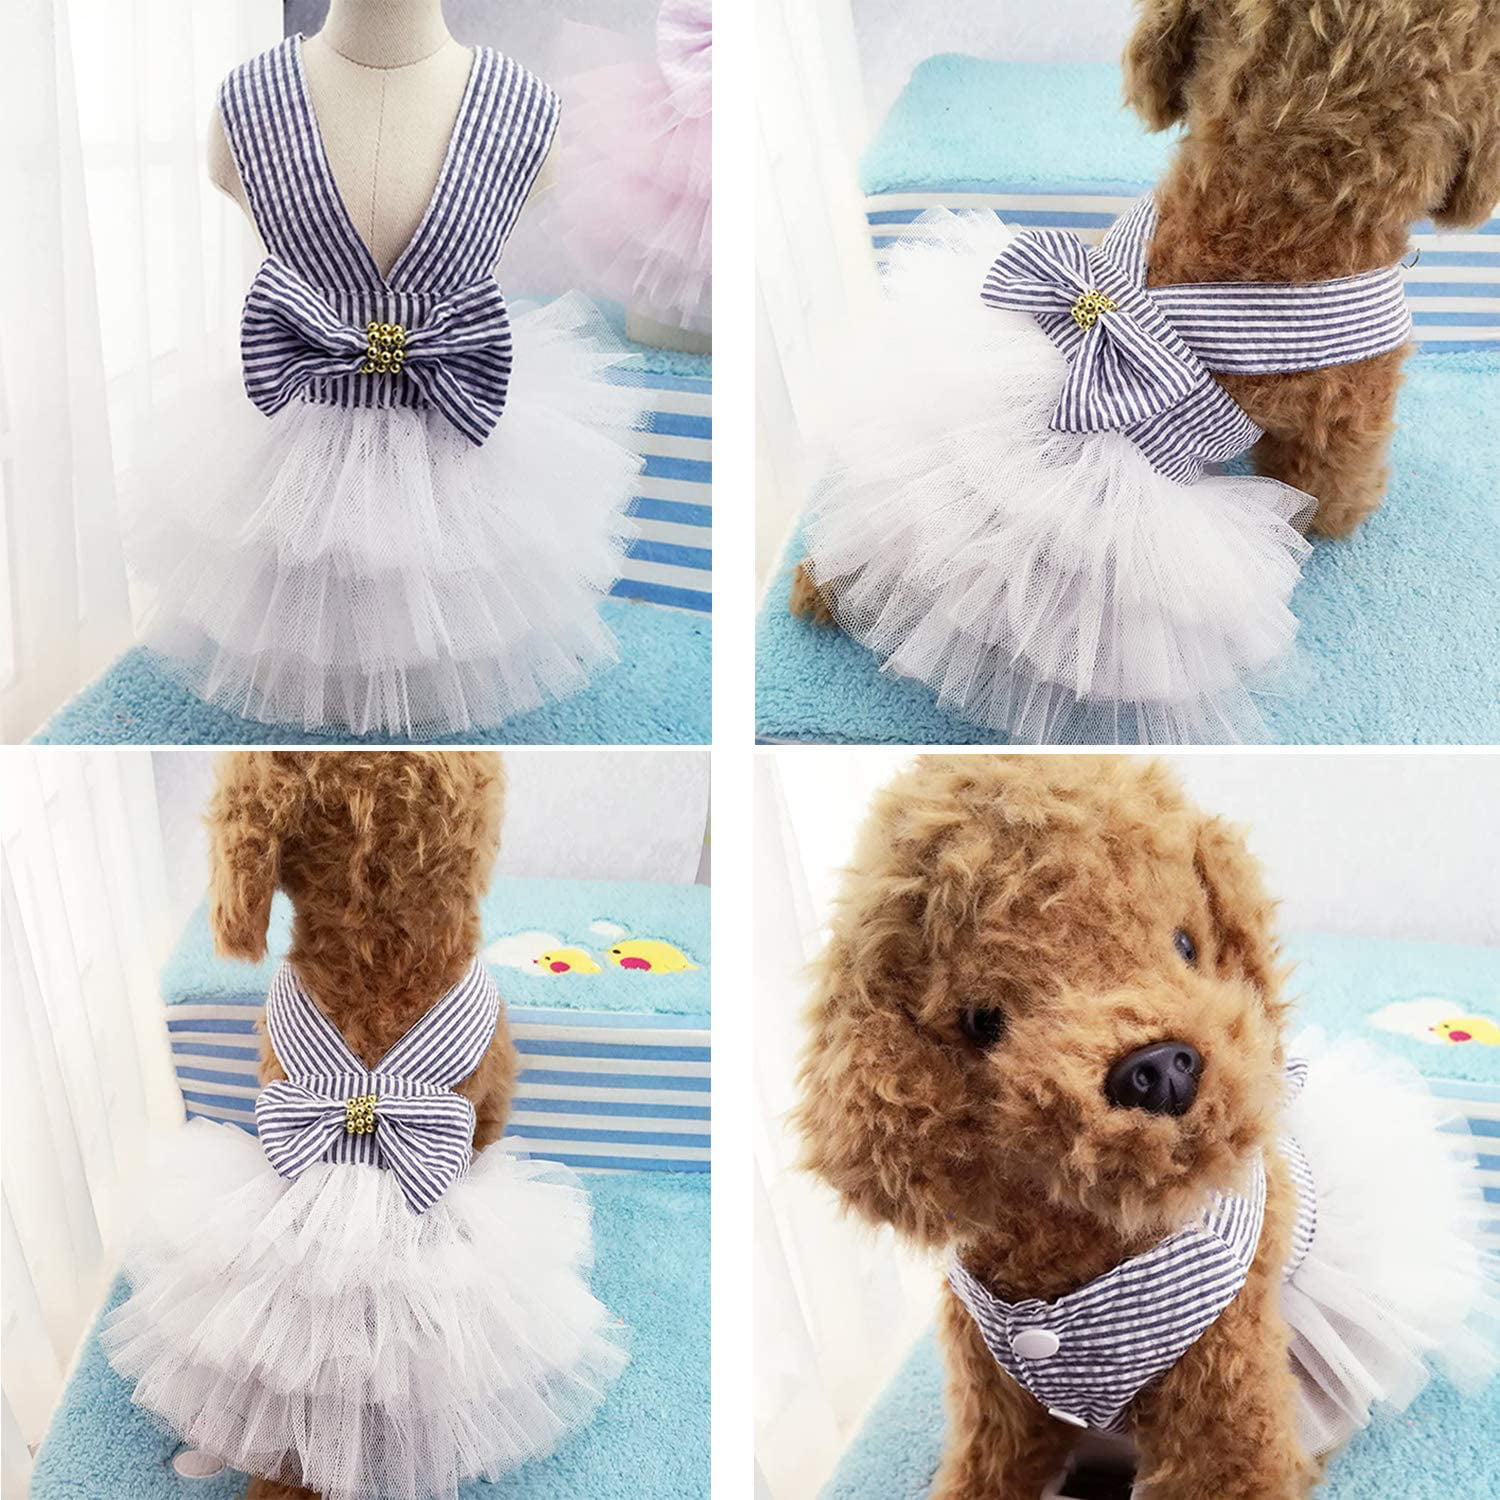 Pet Dog Dress for Girl and Boy Doggy Cats Rabbit Fancy Adorable Striped Mesh Dress Princess Petit Vest Doggie Bowknot Dresses for Small Dogs Pomeranian Chihuahua Skirt Pet Puppy Pink S